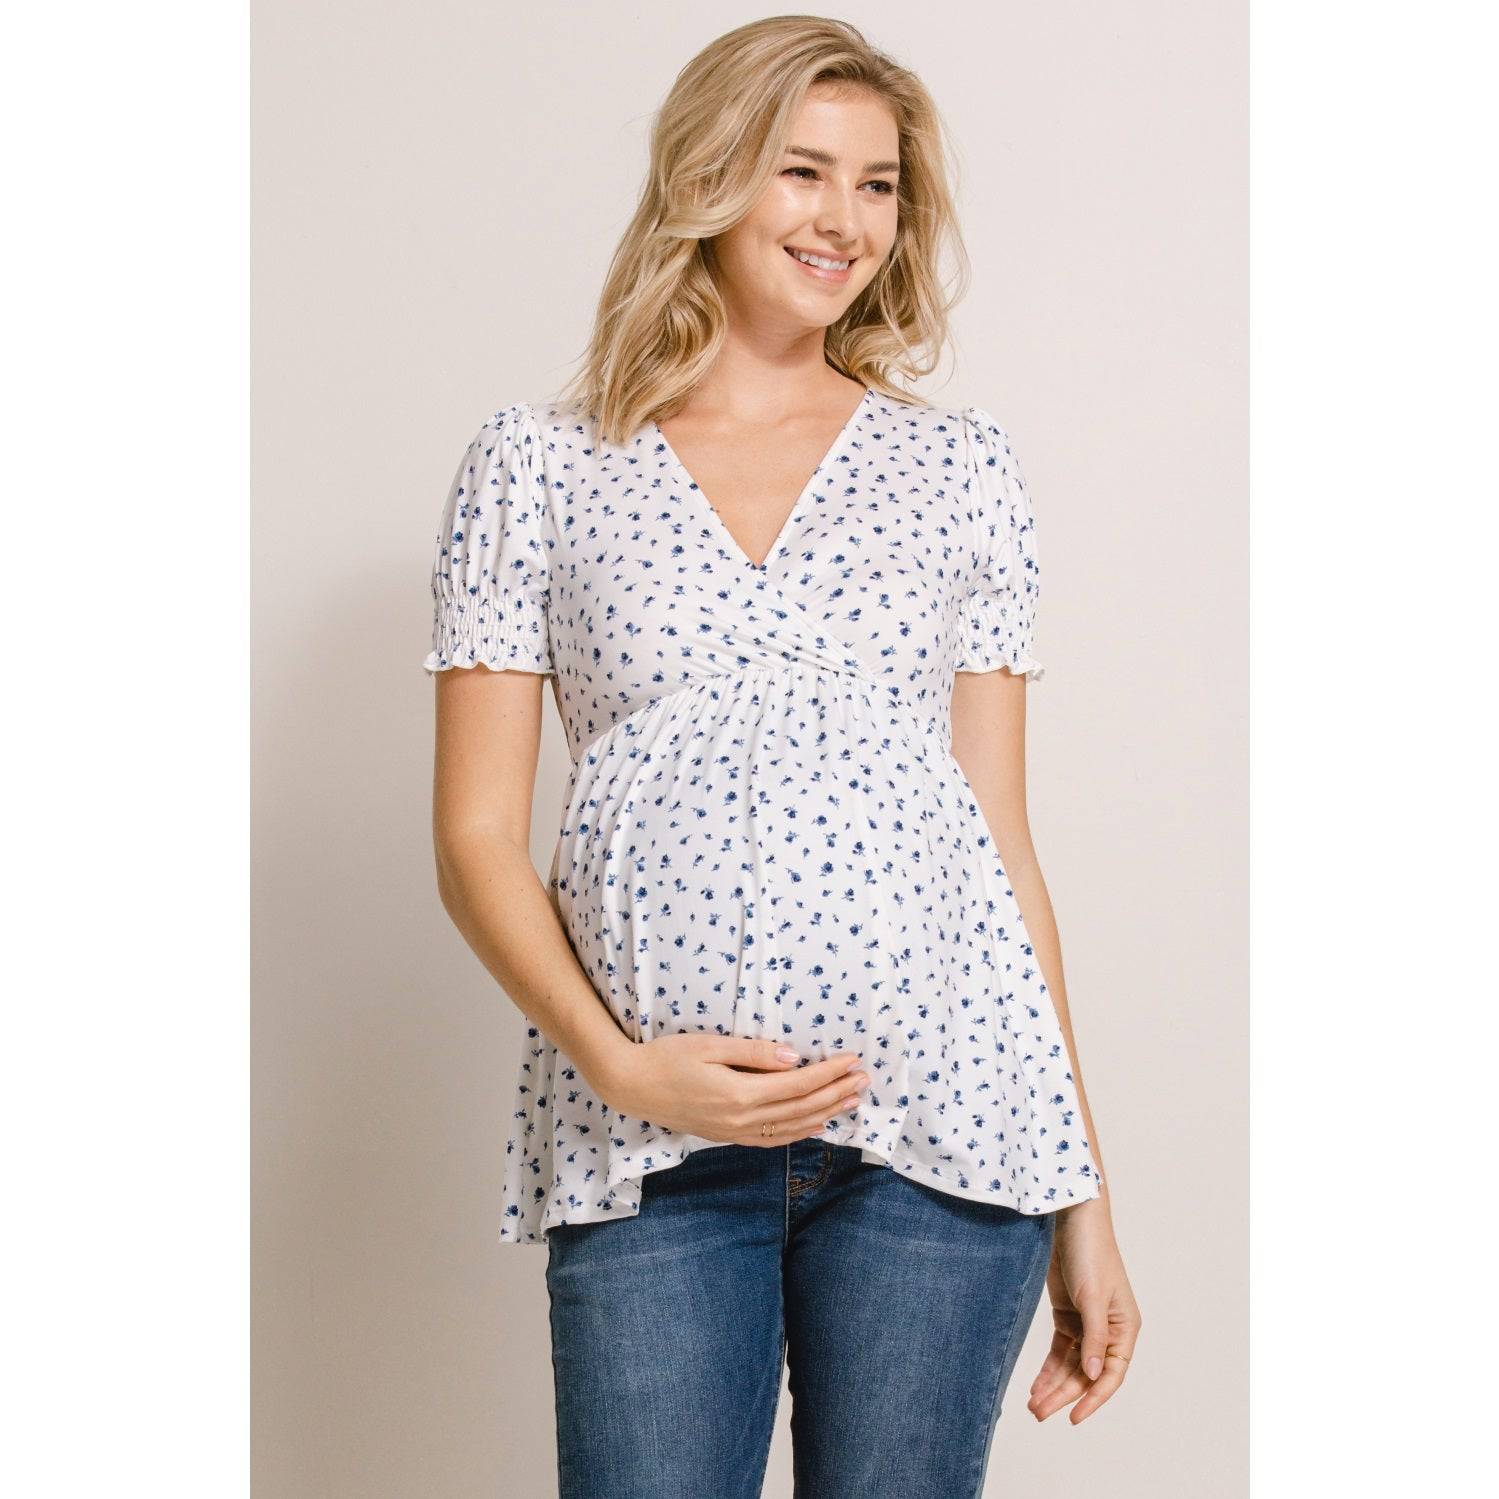 Ditsy Floral Smocking Sleeve Wrapped Maternity Top - Stella Lane Boutique